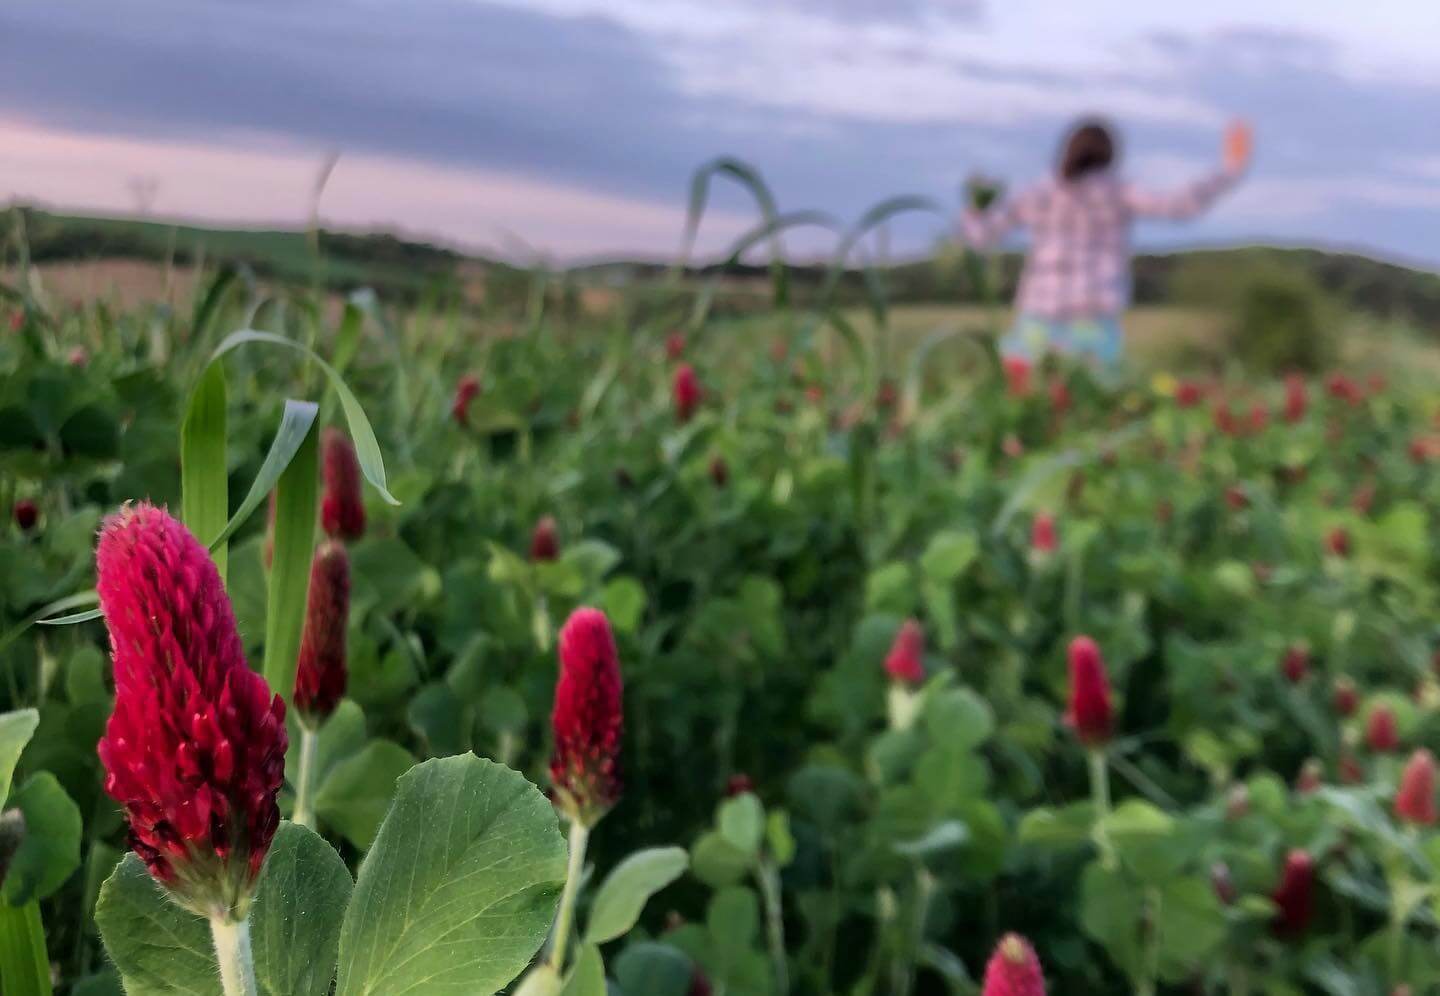 A close up of a red clover crop with a woman in the background. January 2021